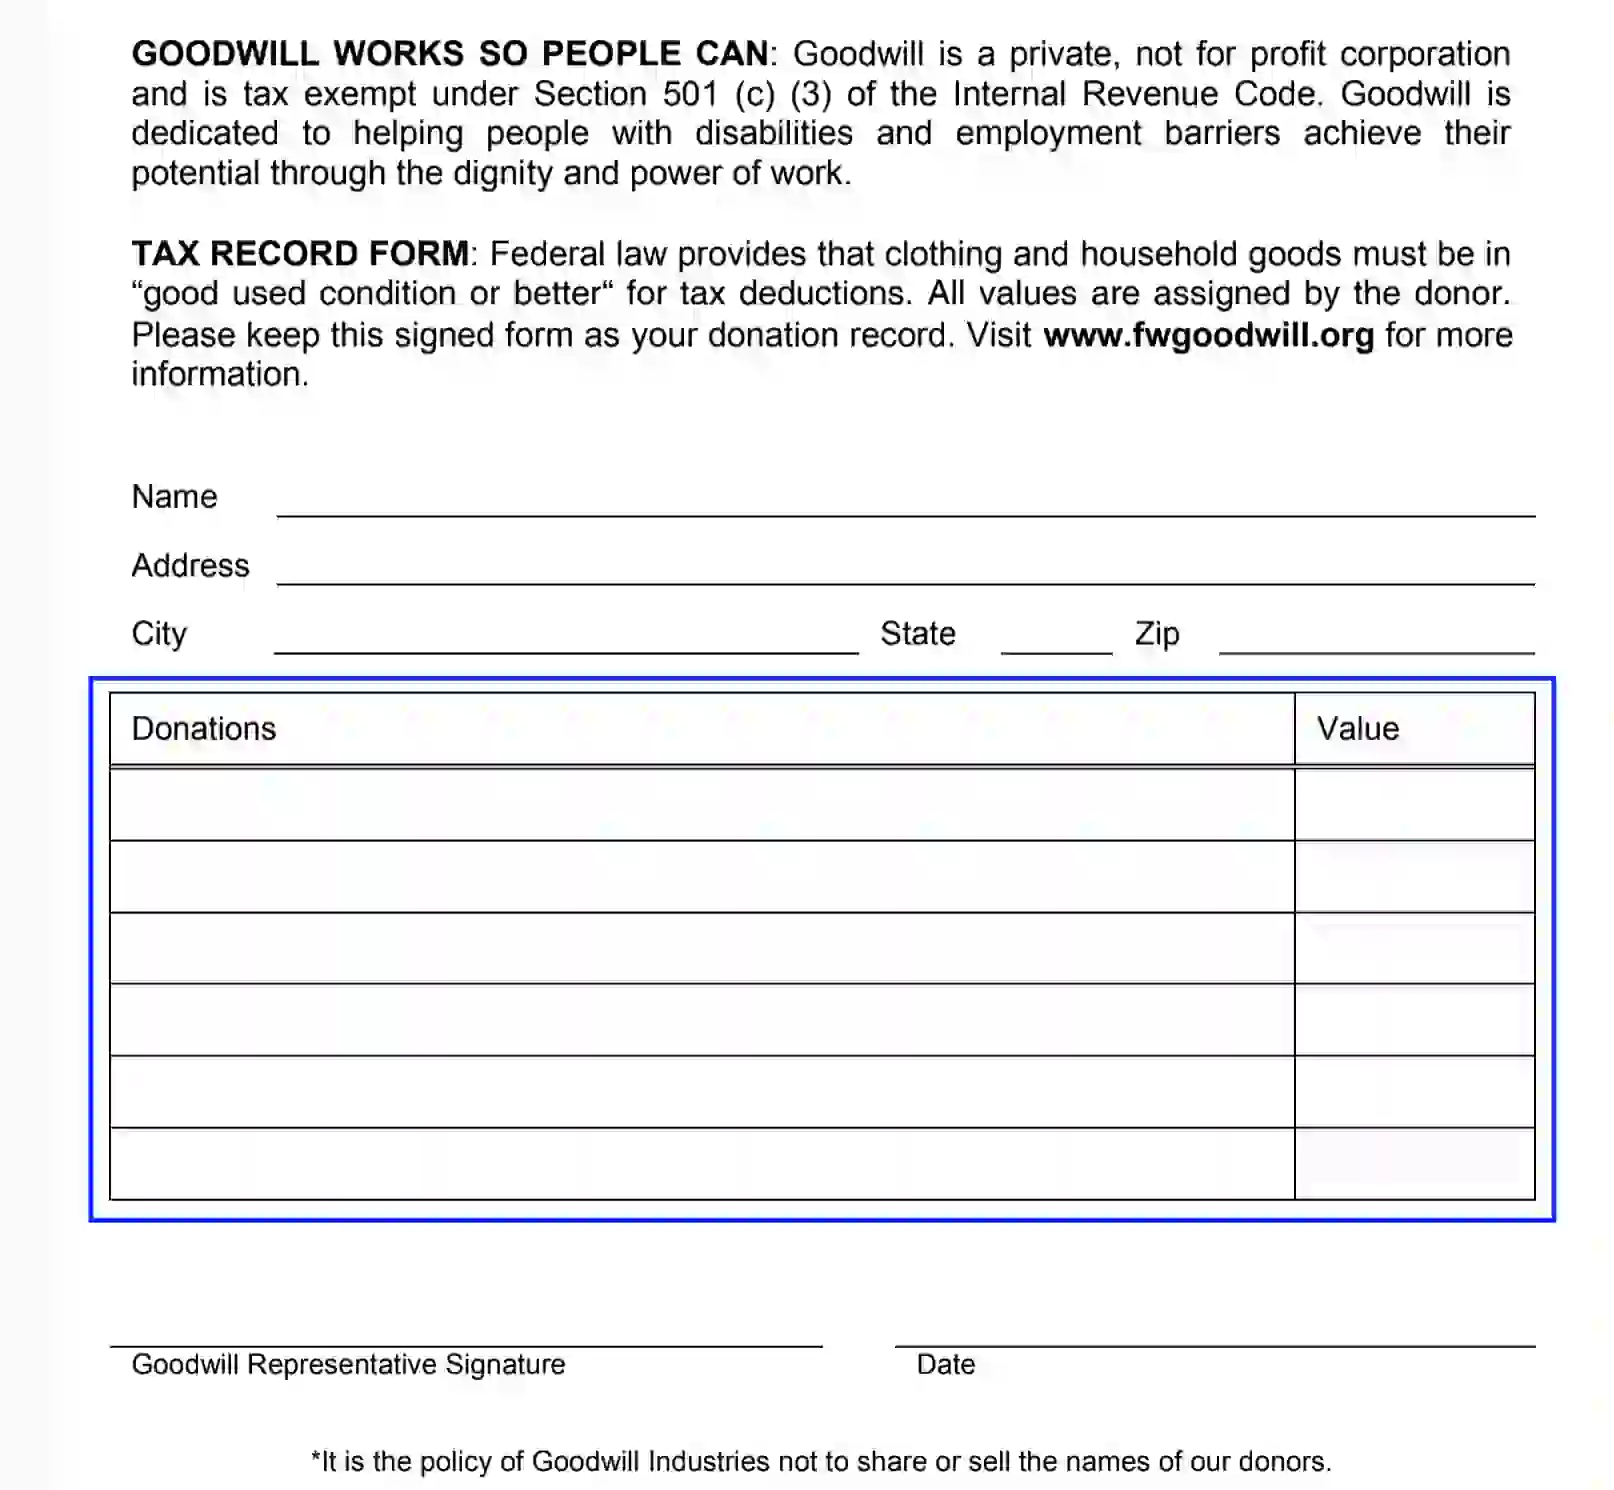 How to fill out a donation tax receipt - Goodwill NNE